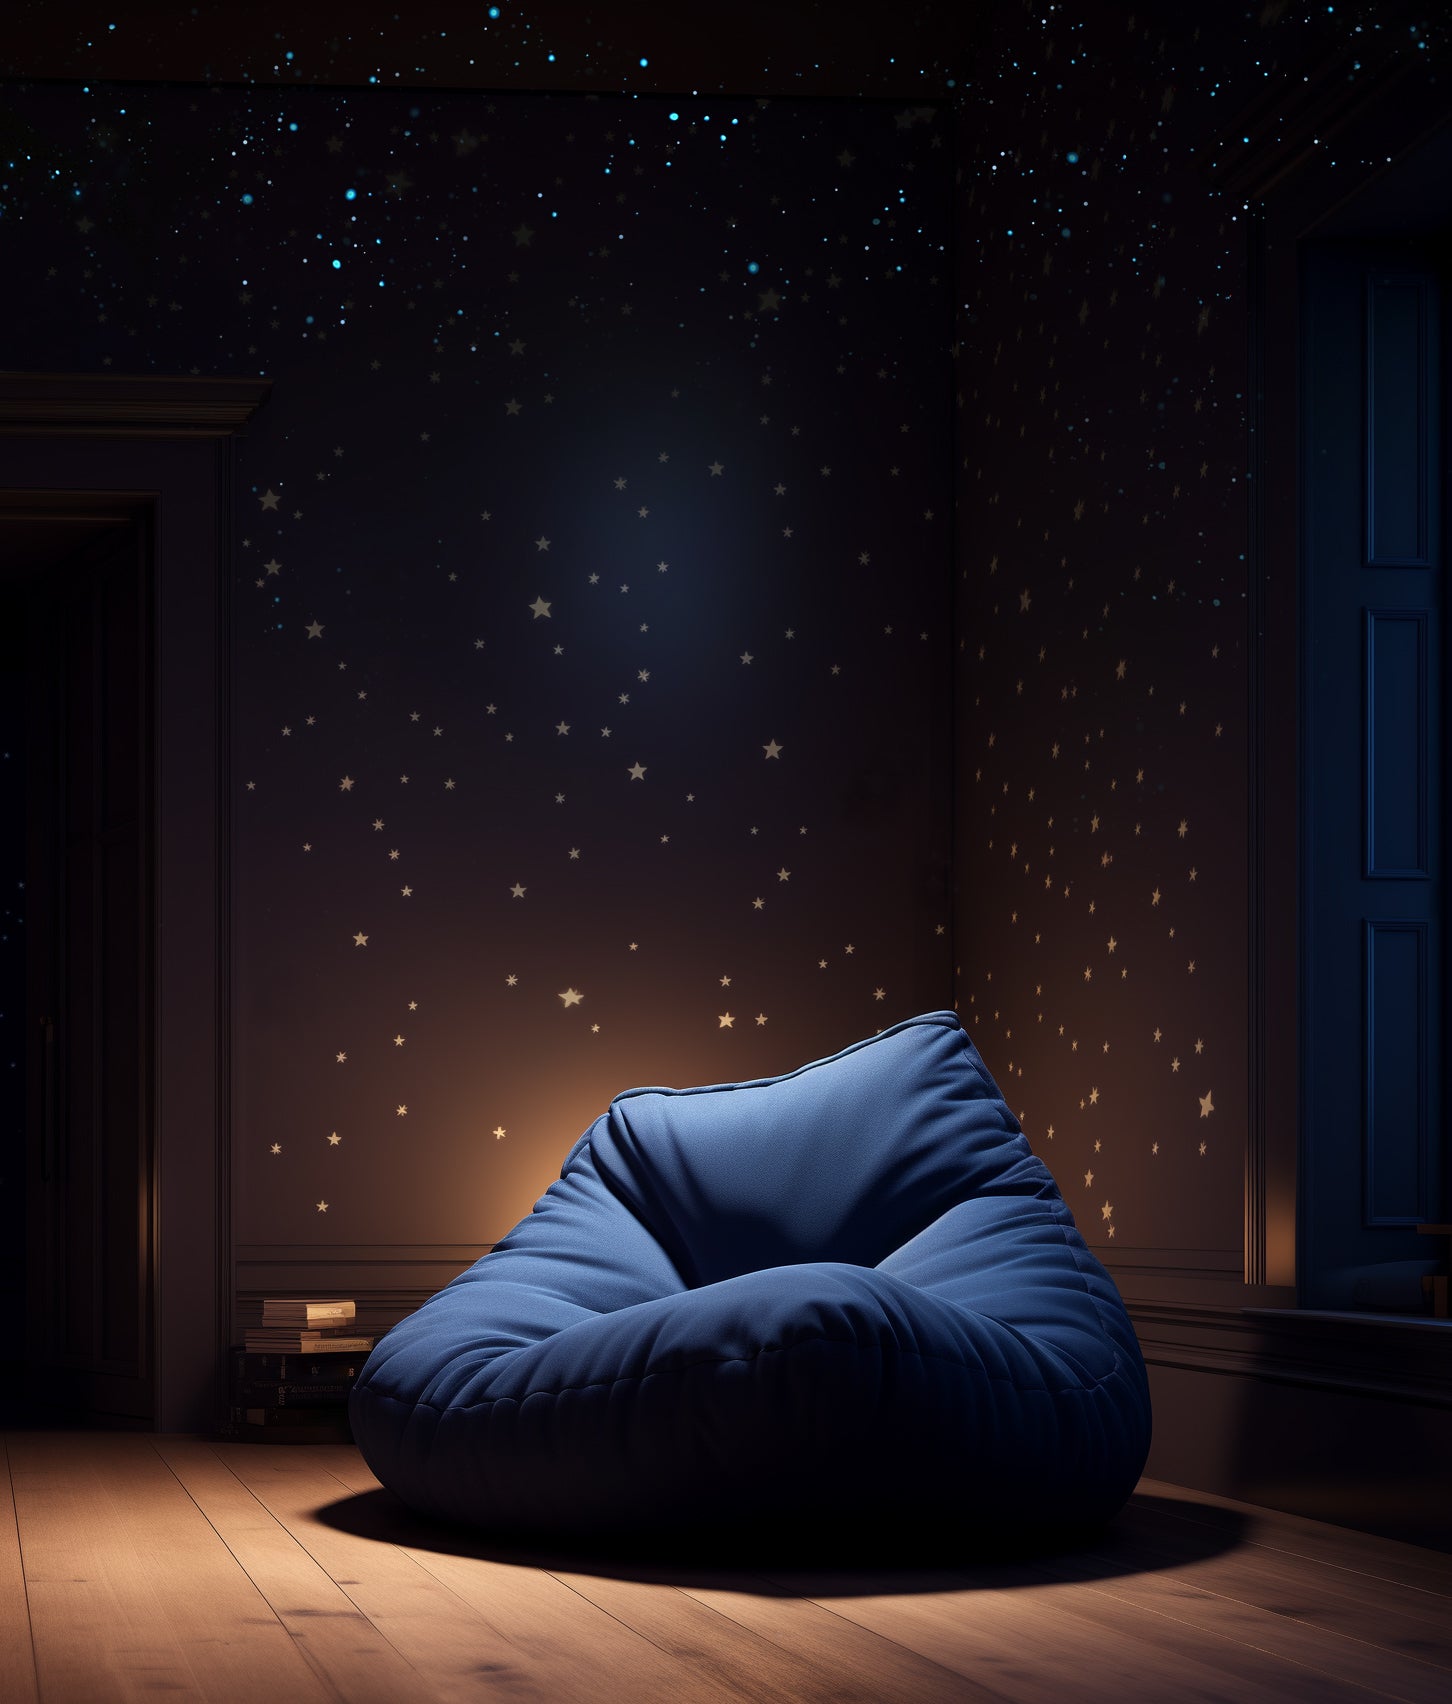 sensory dark therapy room with glow in the dark stars, star stickers and comfy bean bag. Chill out room.